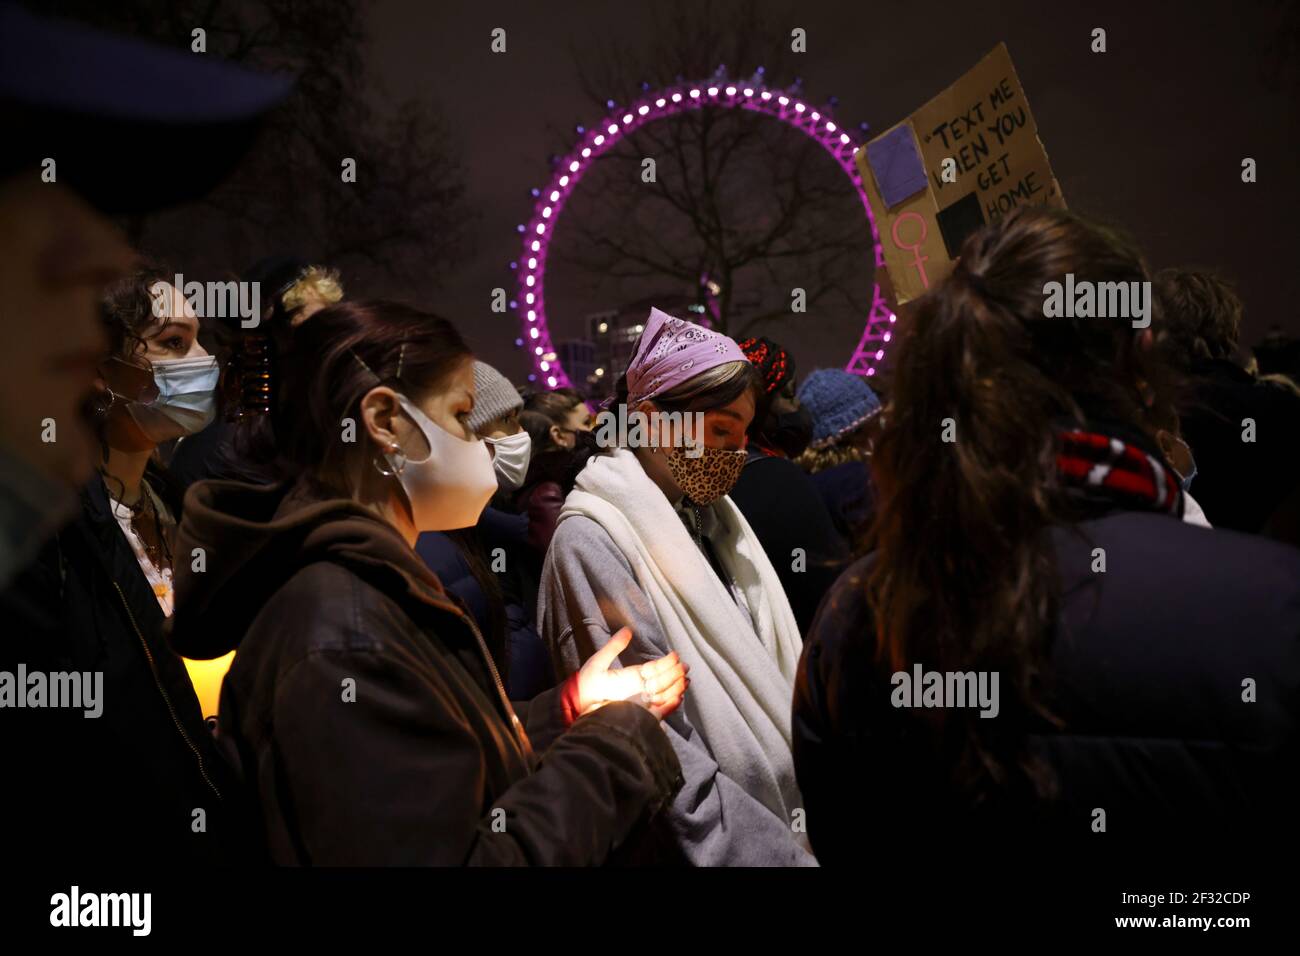 People attend a protest outside New Scotland Yard, following the kidnap and murder of Sarah Everard, in London, Britain March 14, 2021. REUTERS/Henry Nicholls Stock Photo